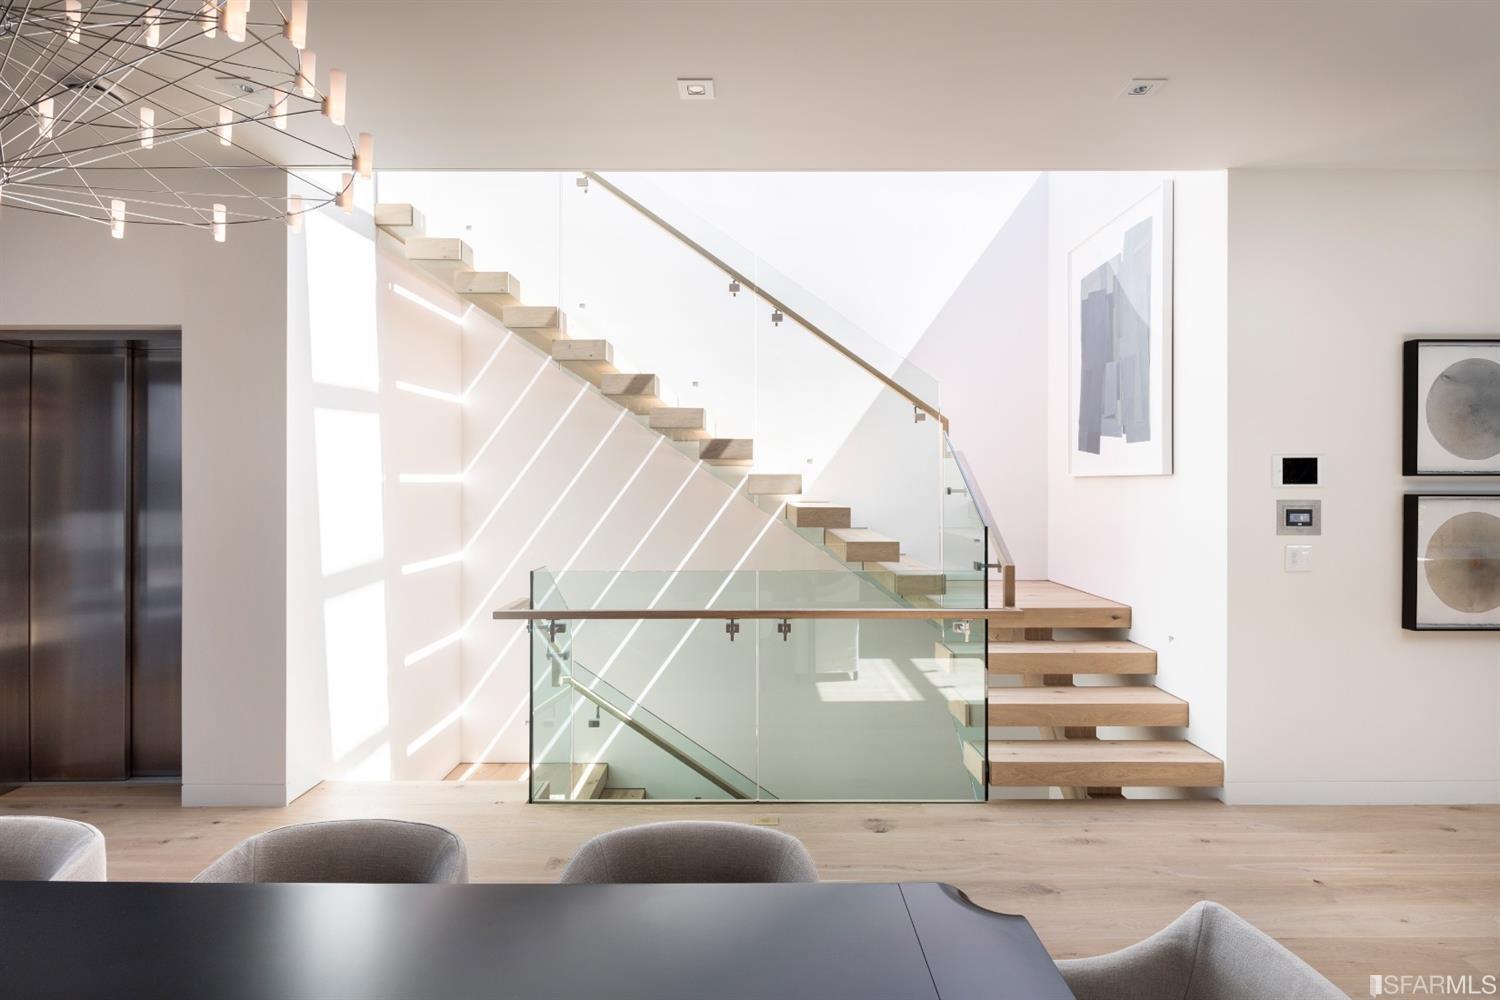 Stairway with glass banister